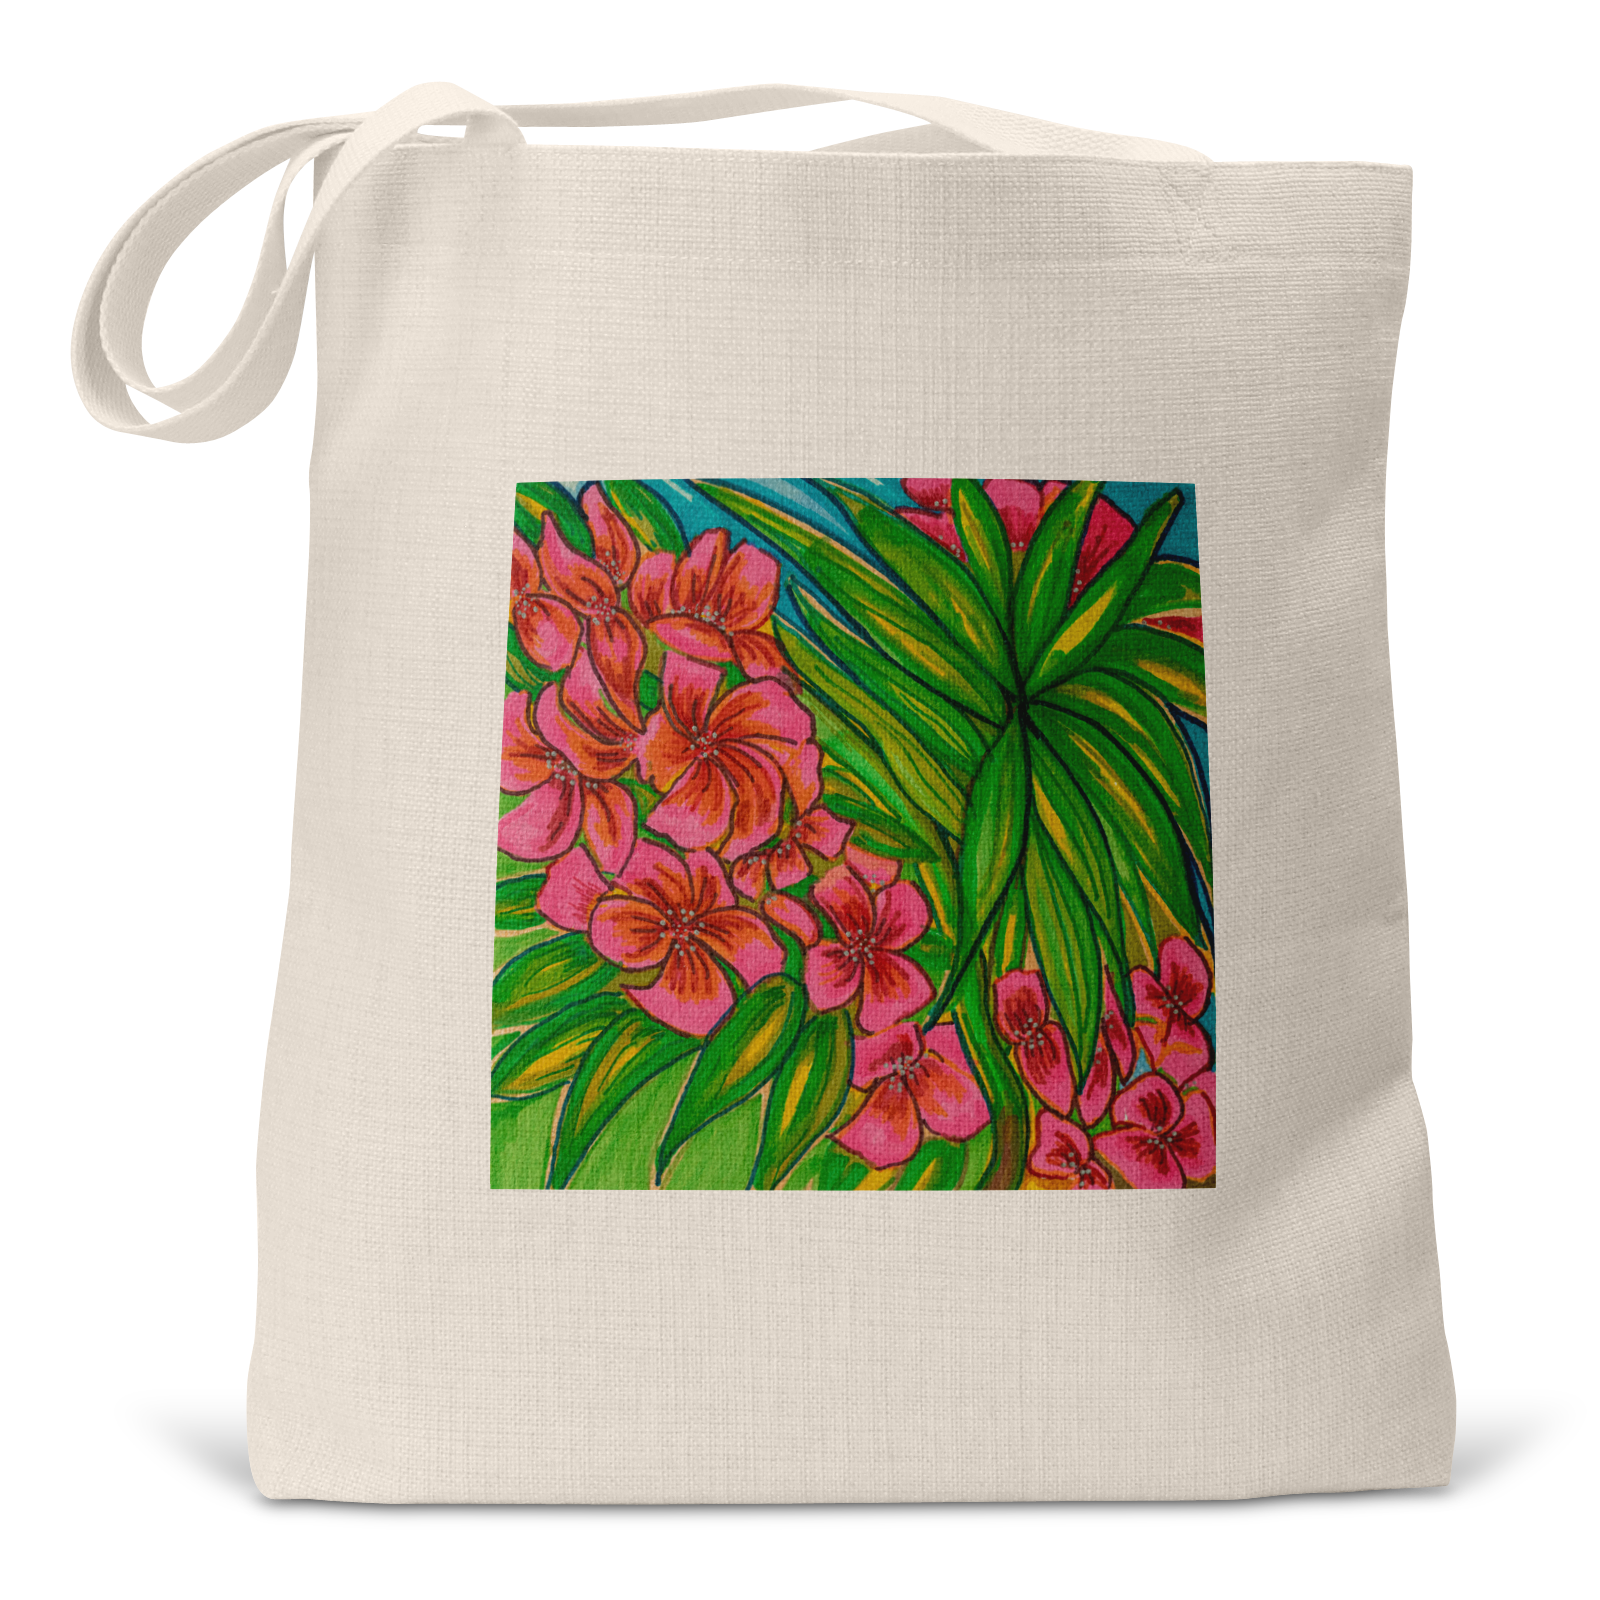 "Tropical Vibes" - Linen Tote